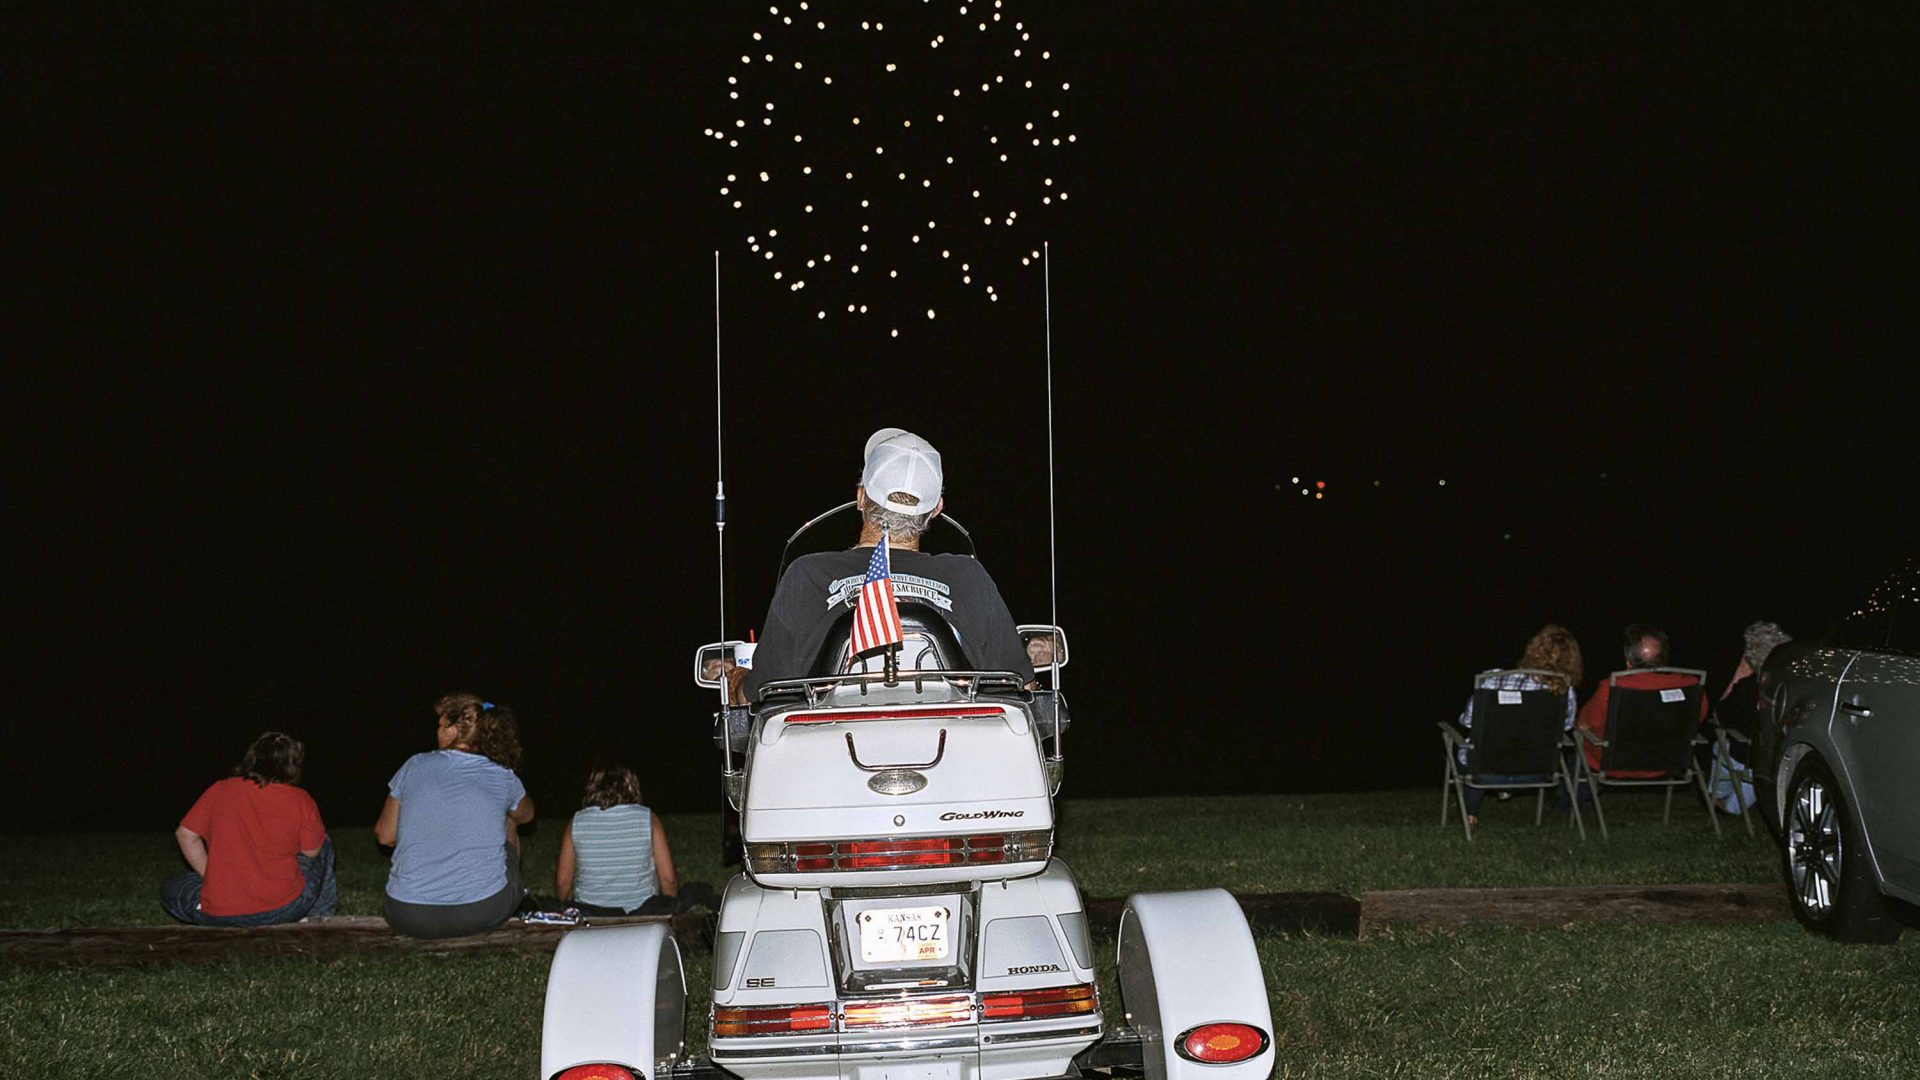 A man watches fireworks from a buggy.